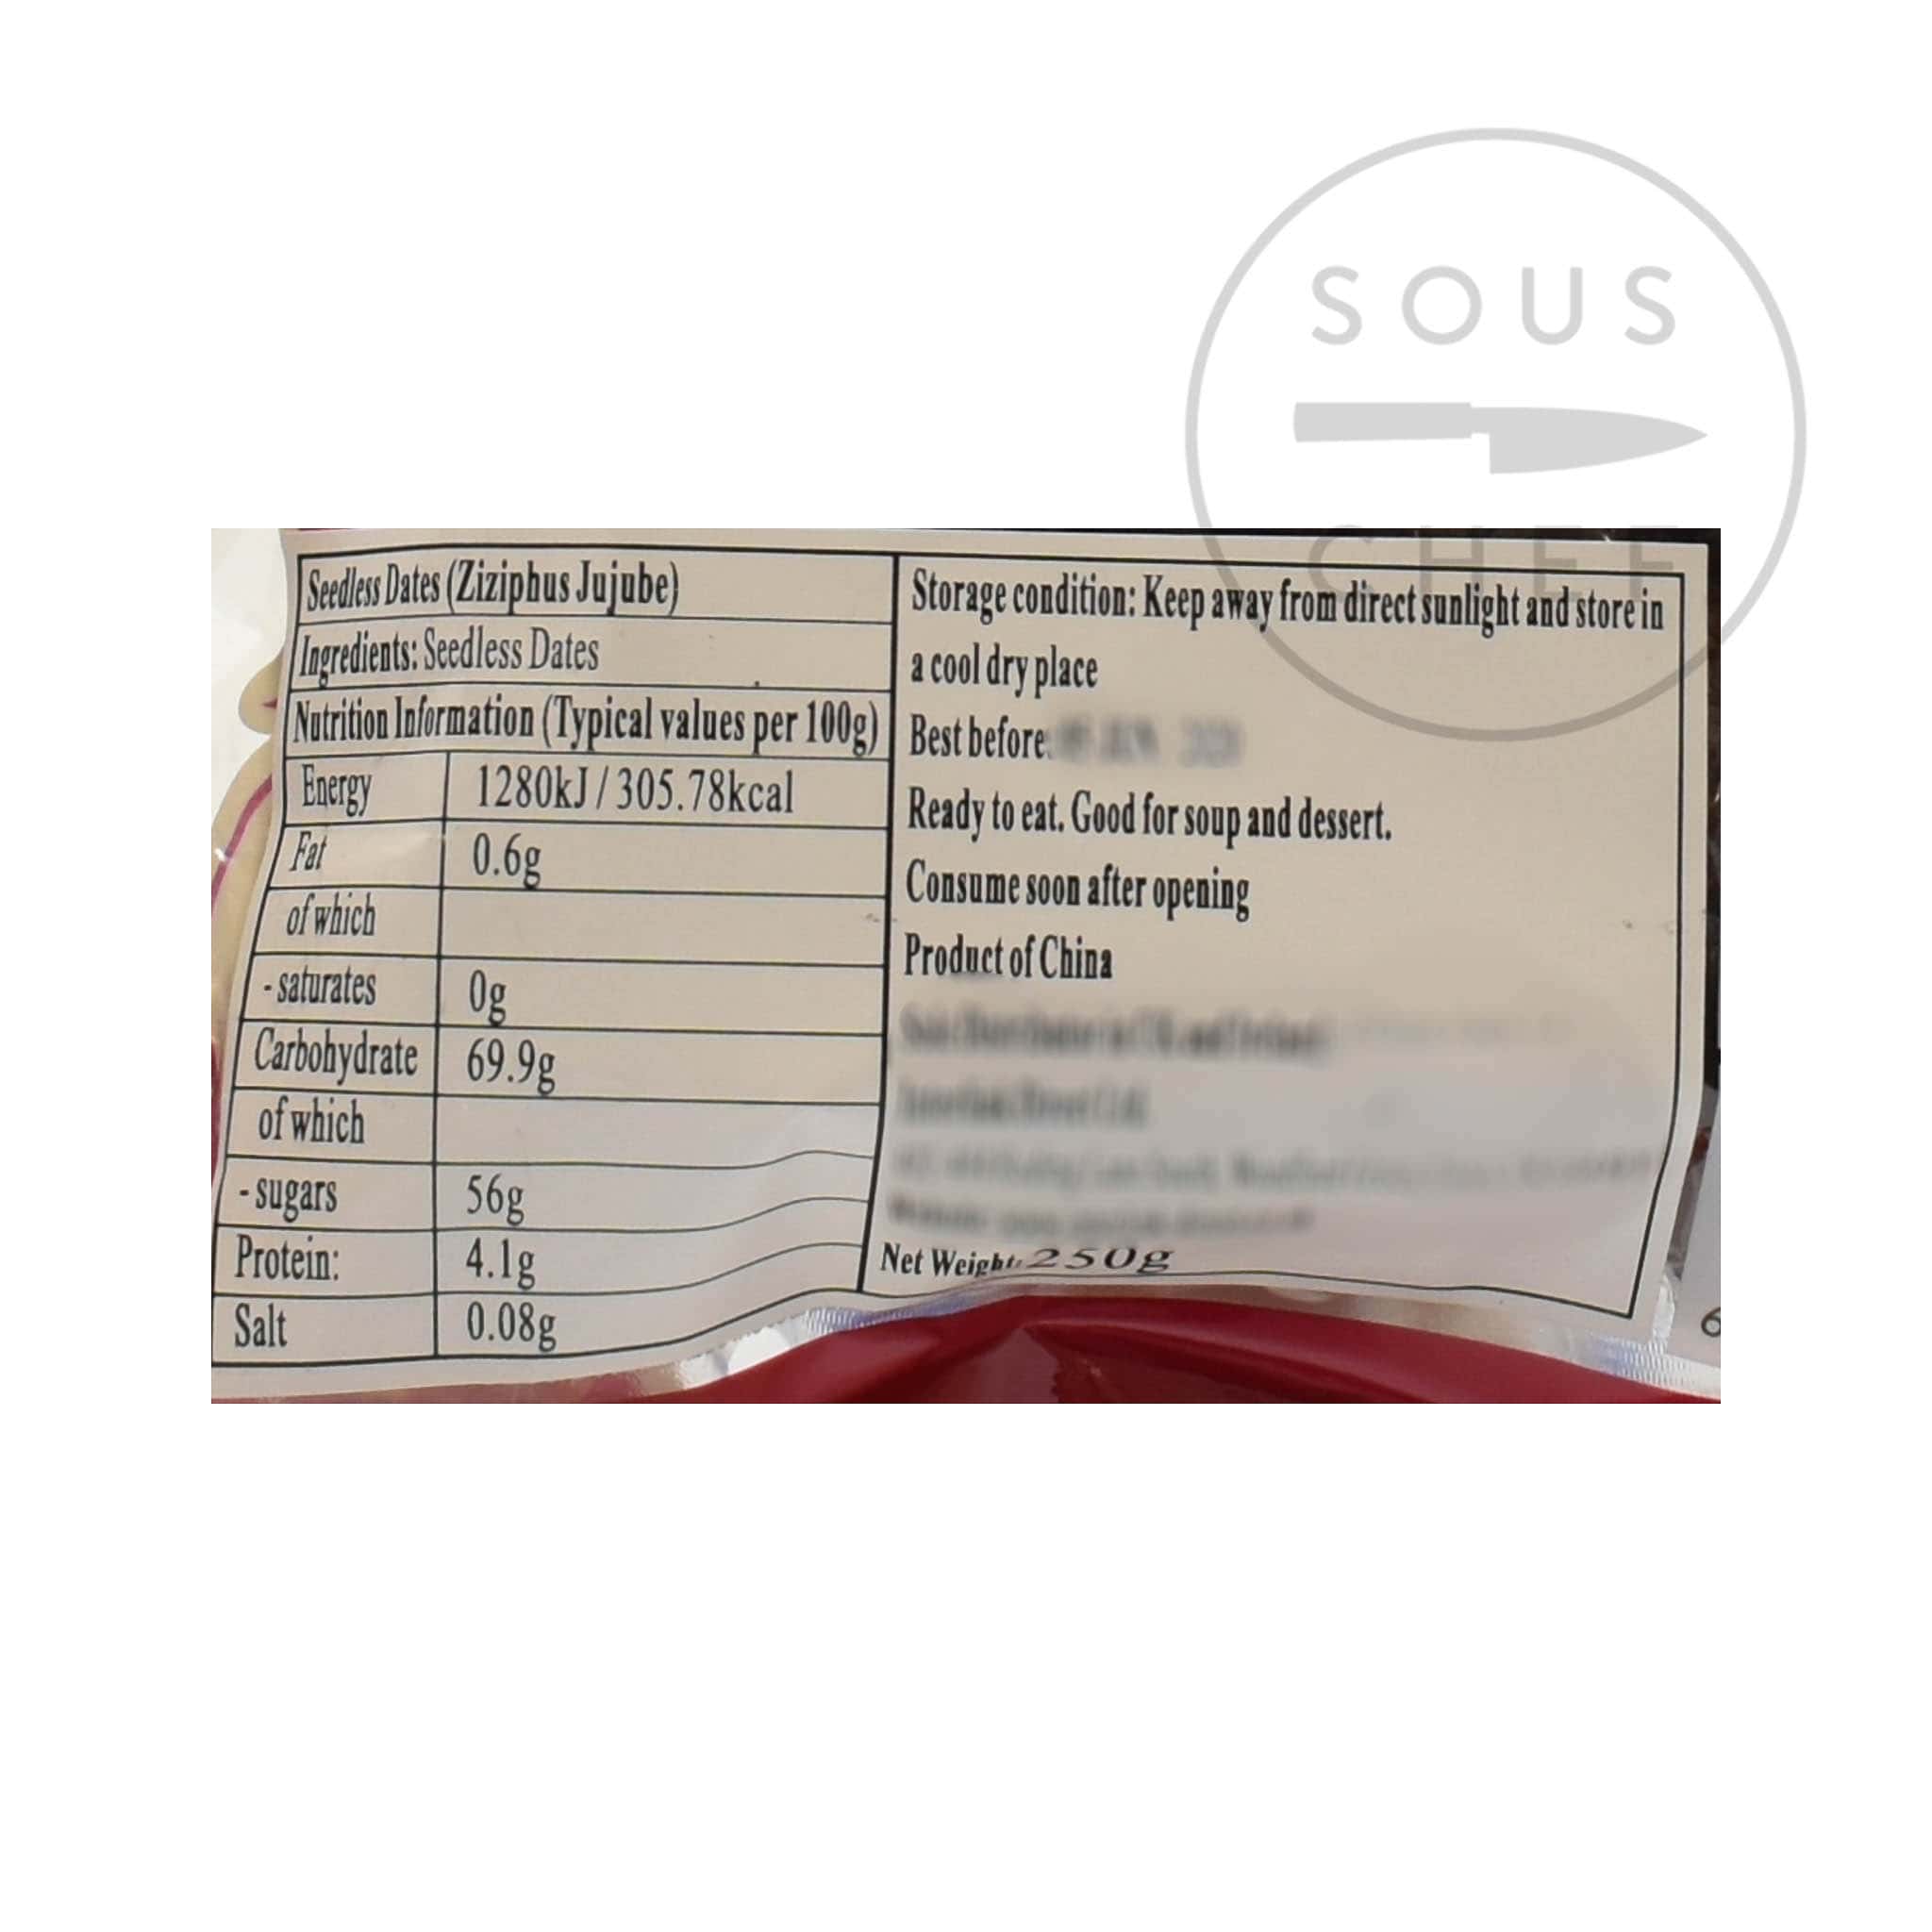 Jujube - Chinese Red Date 250g Ingredients